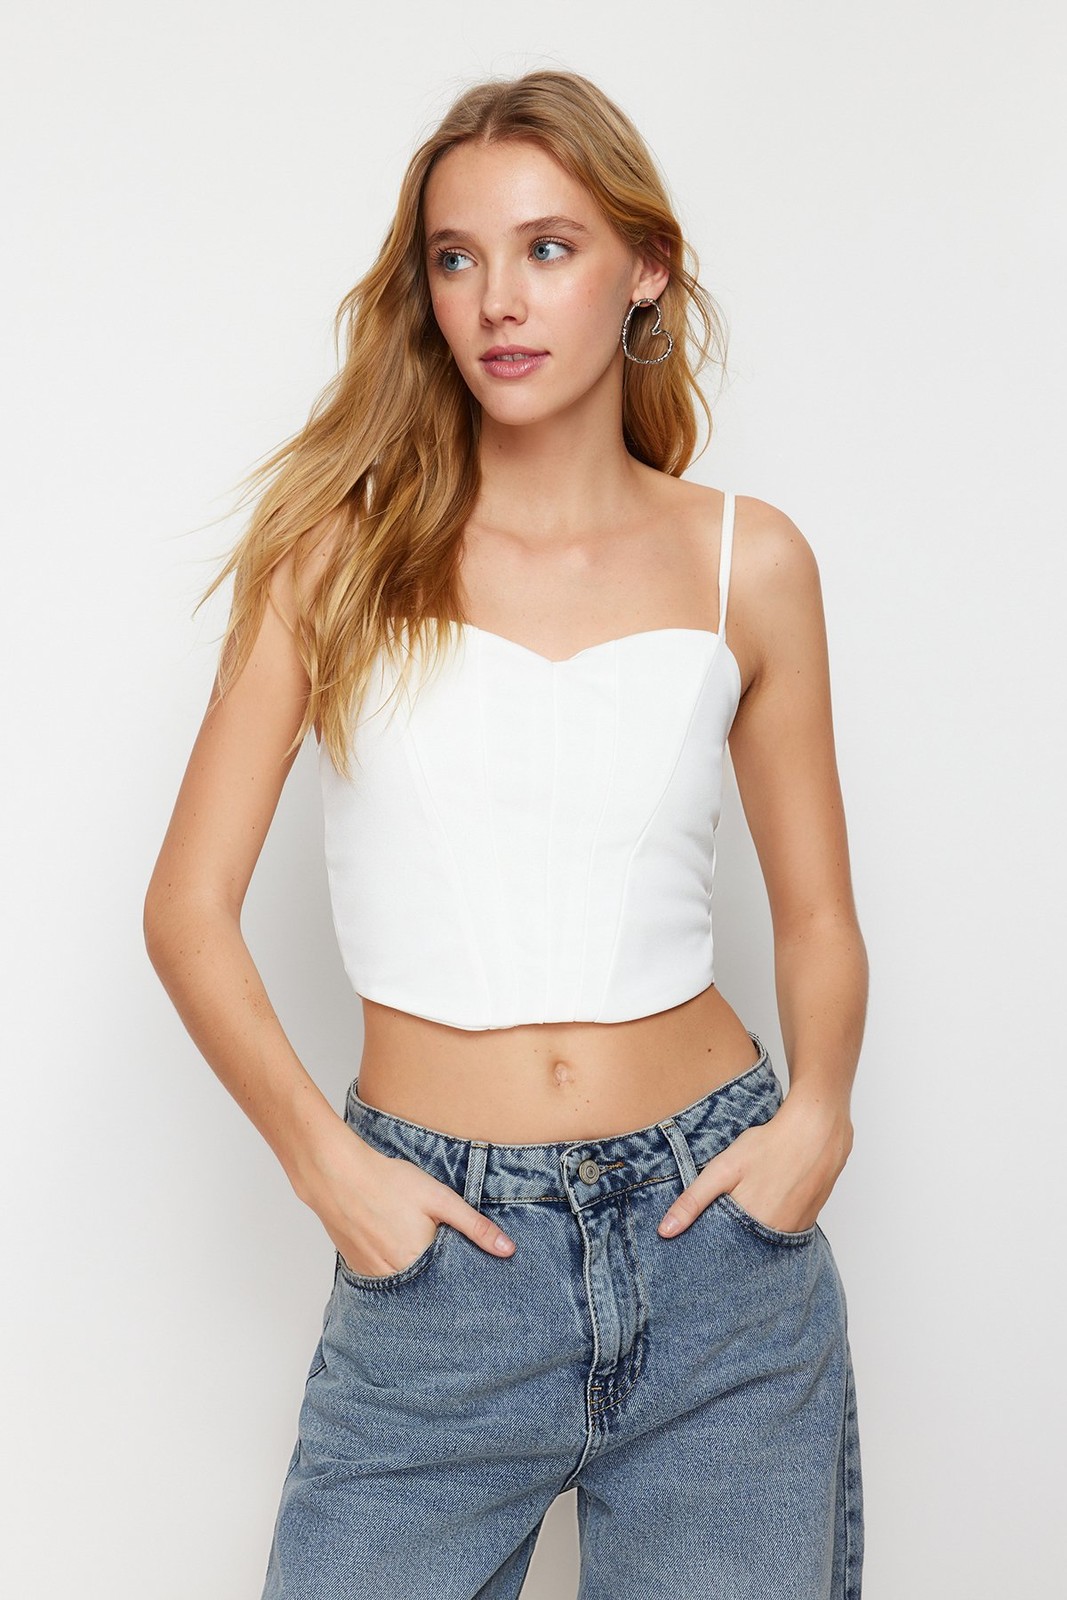 Trendyol White Fitted Crop Strap Crepe Knitted Bustier